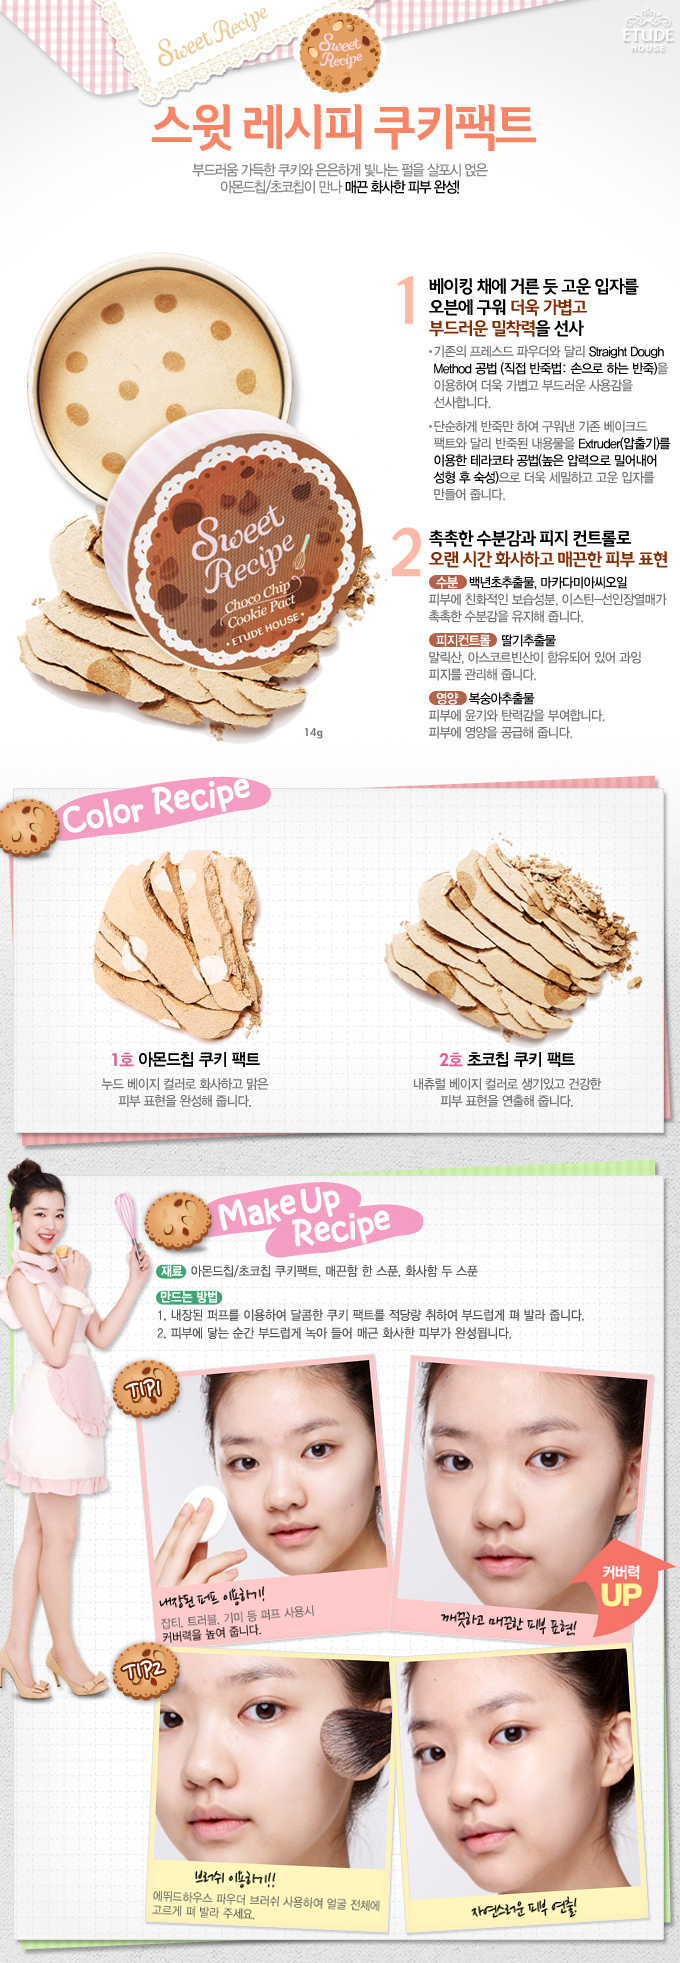 ETUDE HOUSE "Sweet Recipe" Cookie Pact